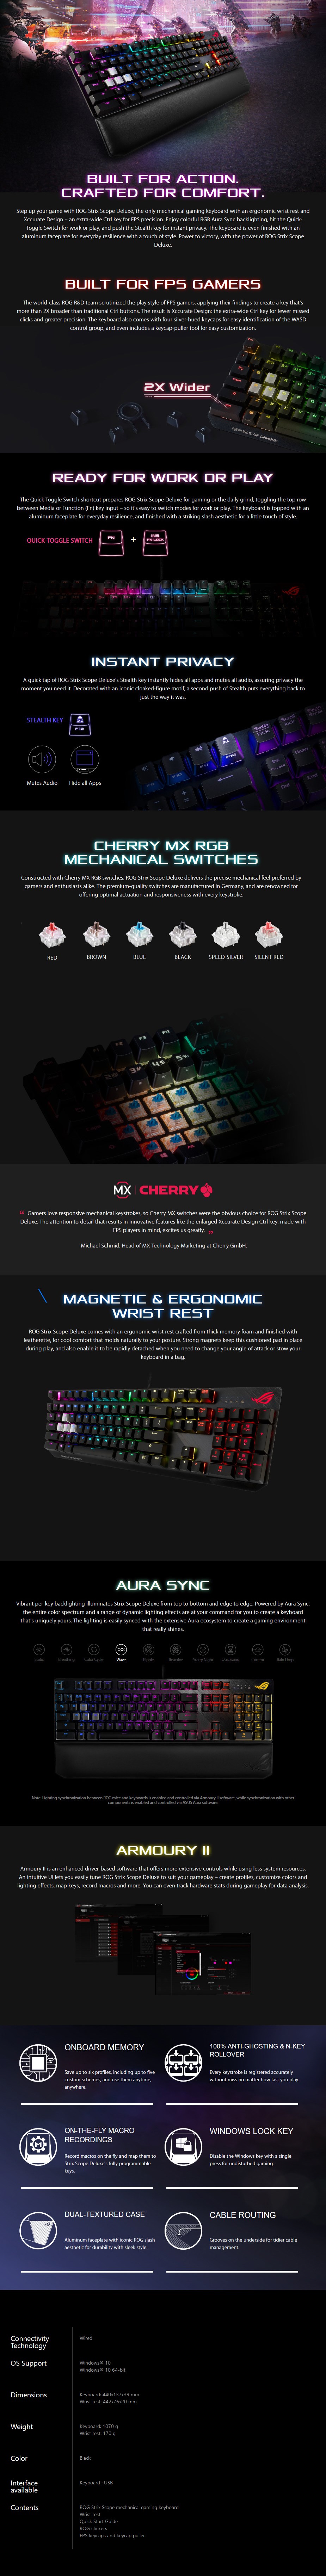 ASUS ROG Strix Scope RGB Mechanical Gaming Keyboard - Cherry MX Brown - Overview 1